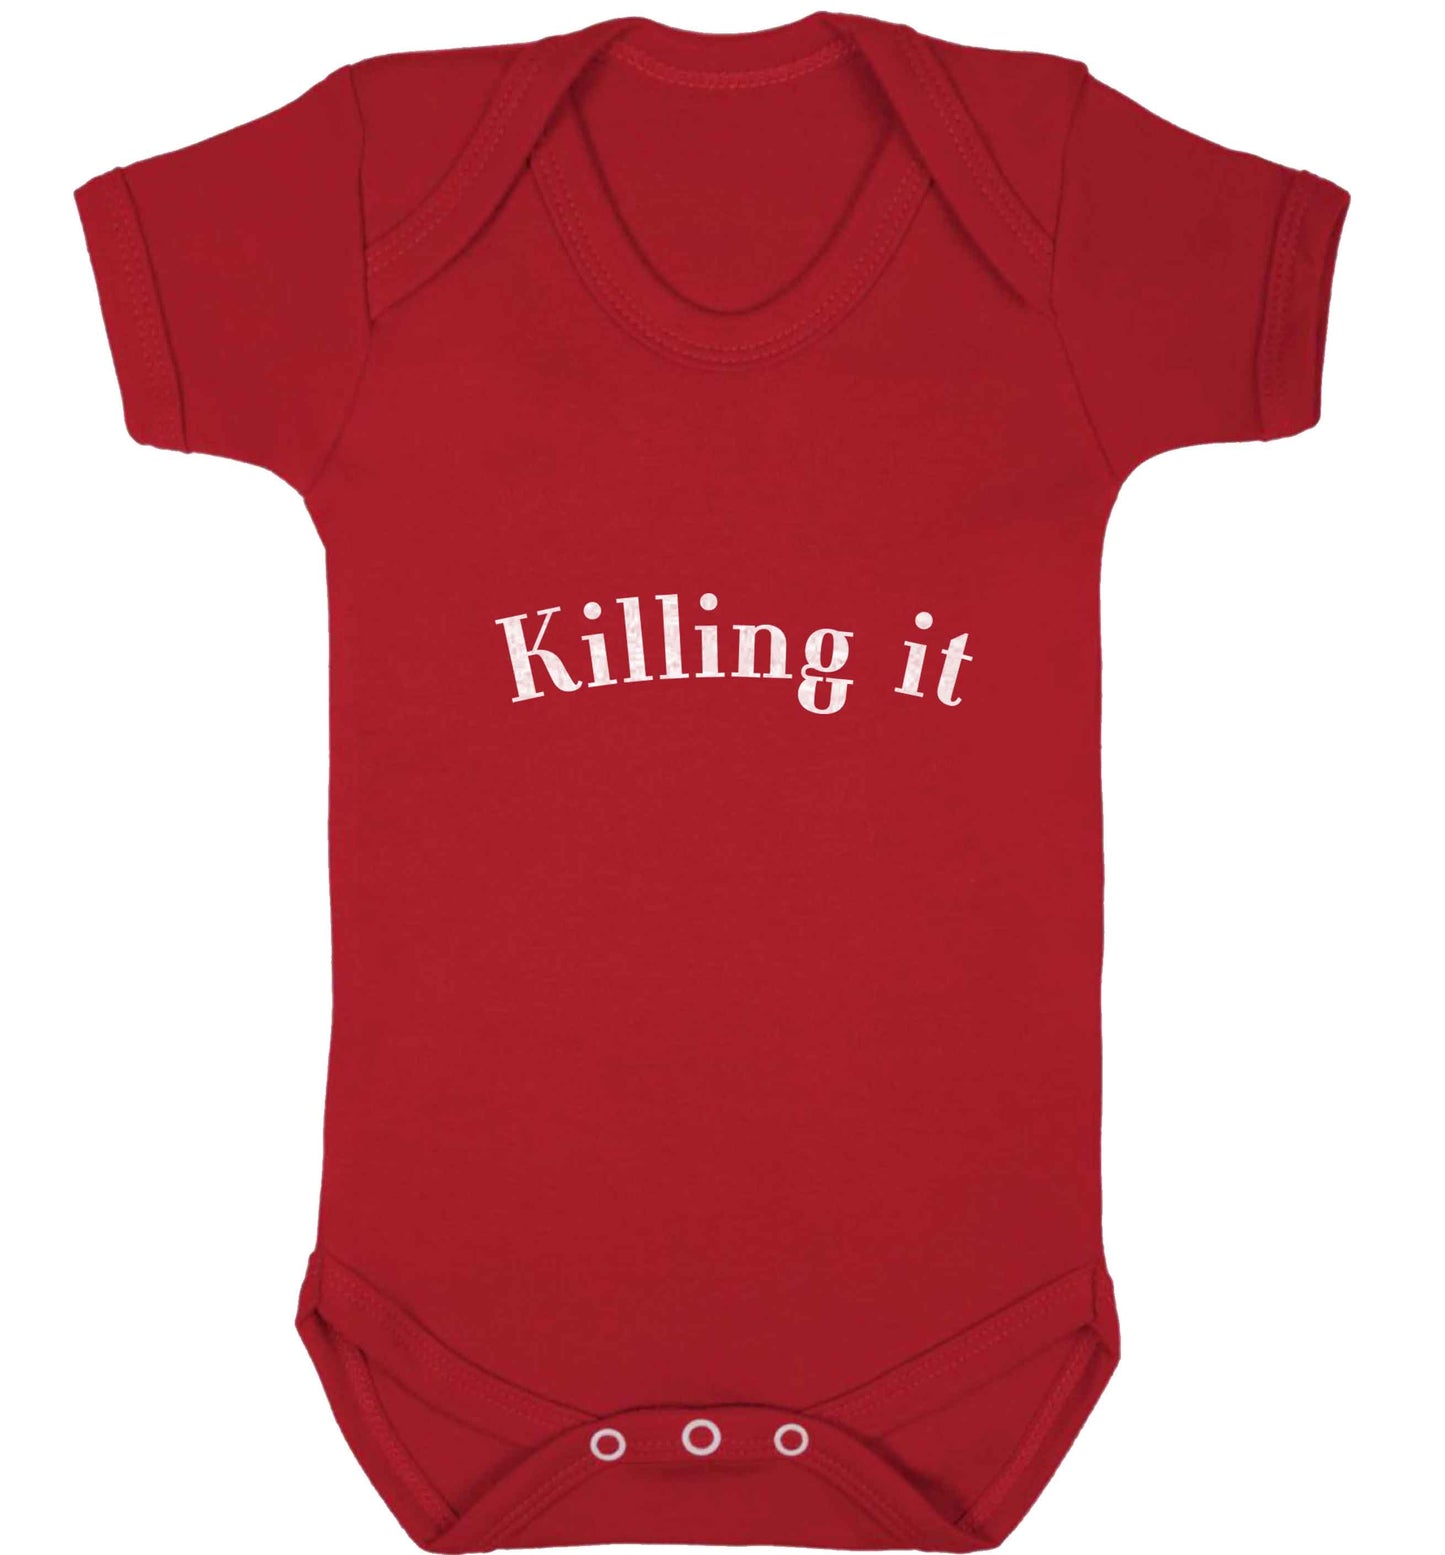 Killing it baby vest red 18-24 months